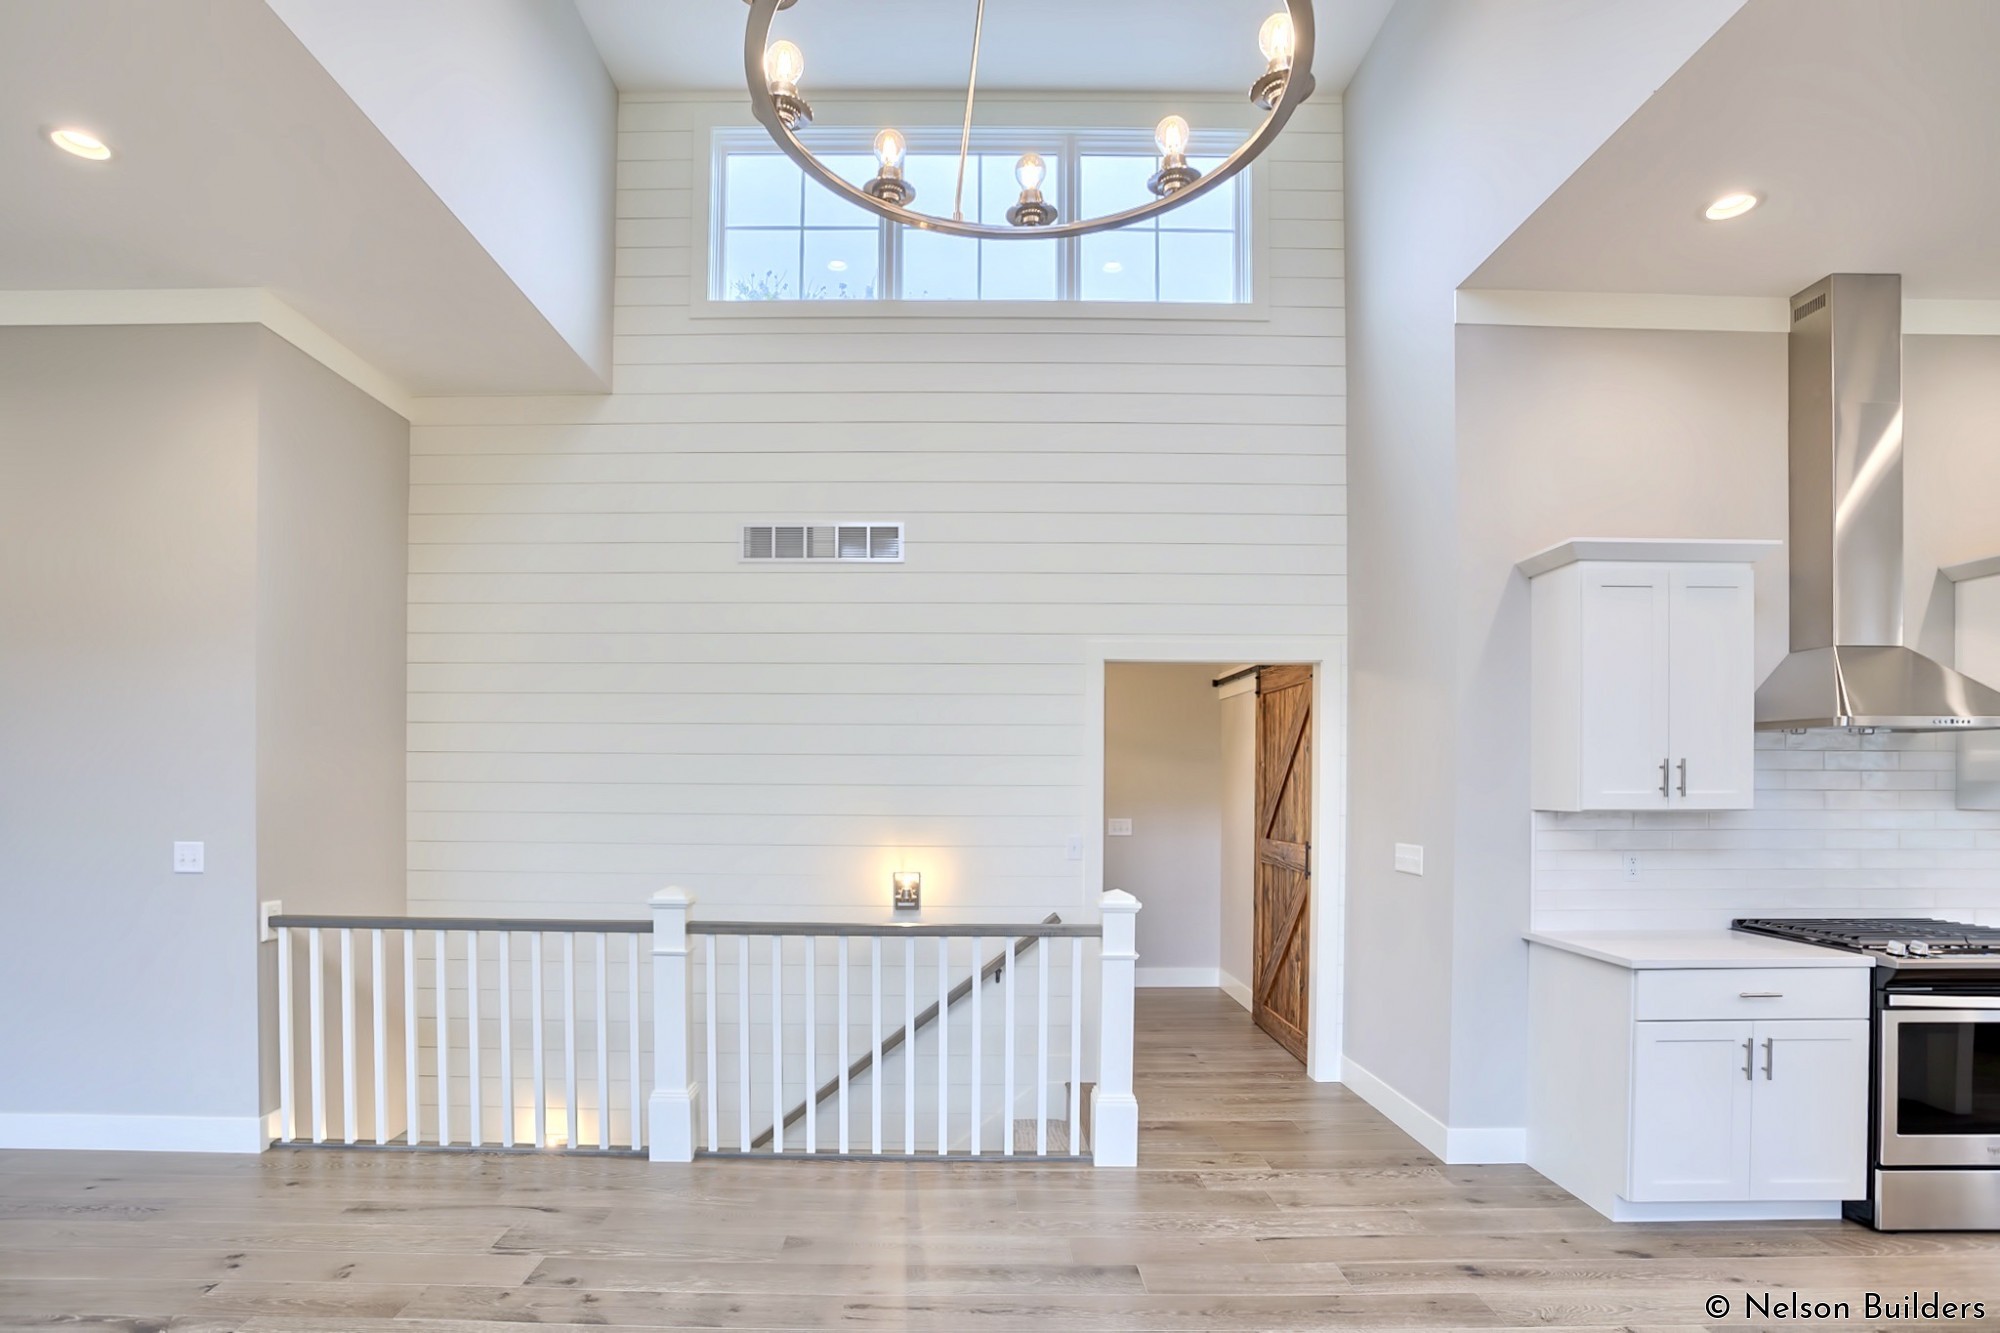 The stairway wall of the dining area serves as a focal point with over 25 feet of shiplap, all the way from the basement to the ceiling.